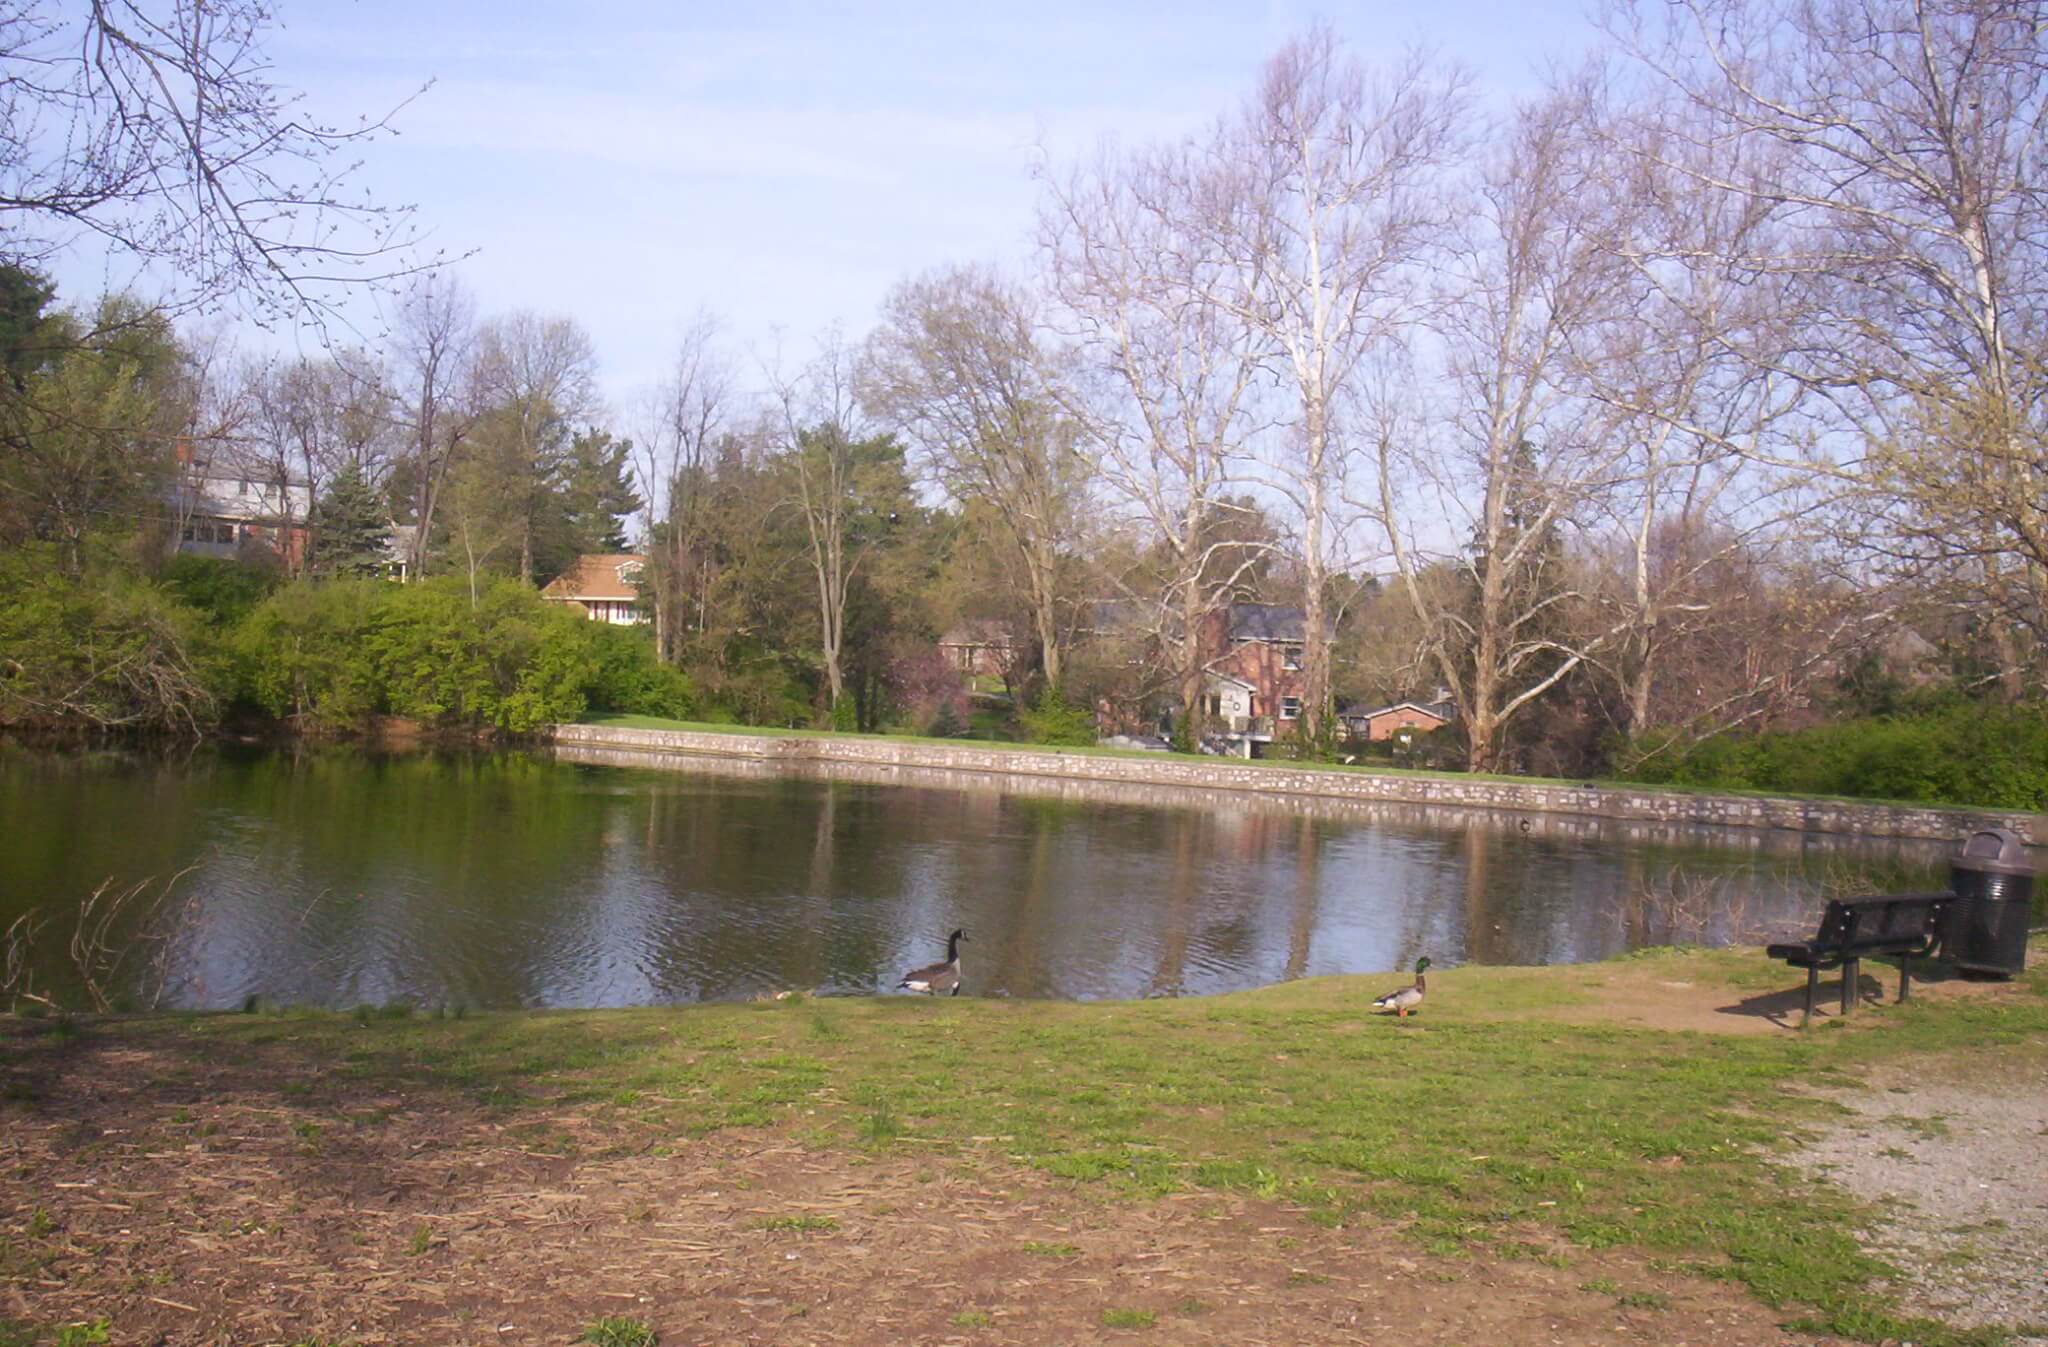 Duck pond is a pleasant place to go -- to feed the ducks, of course.